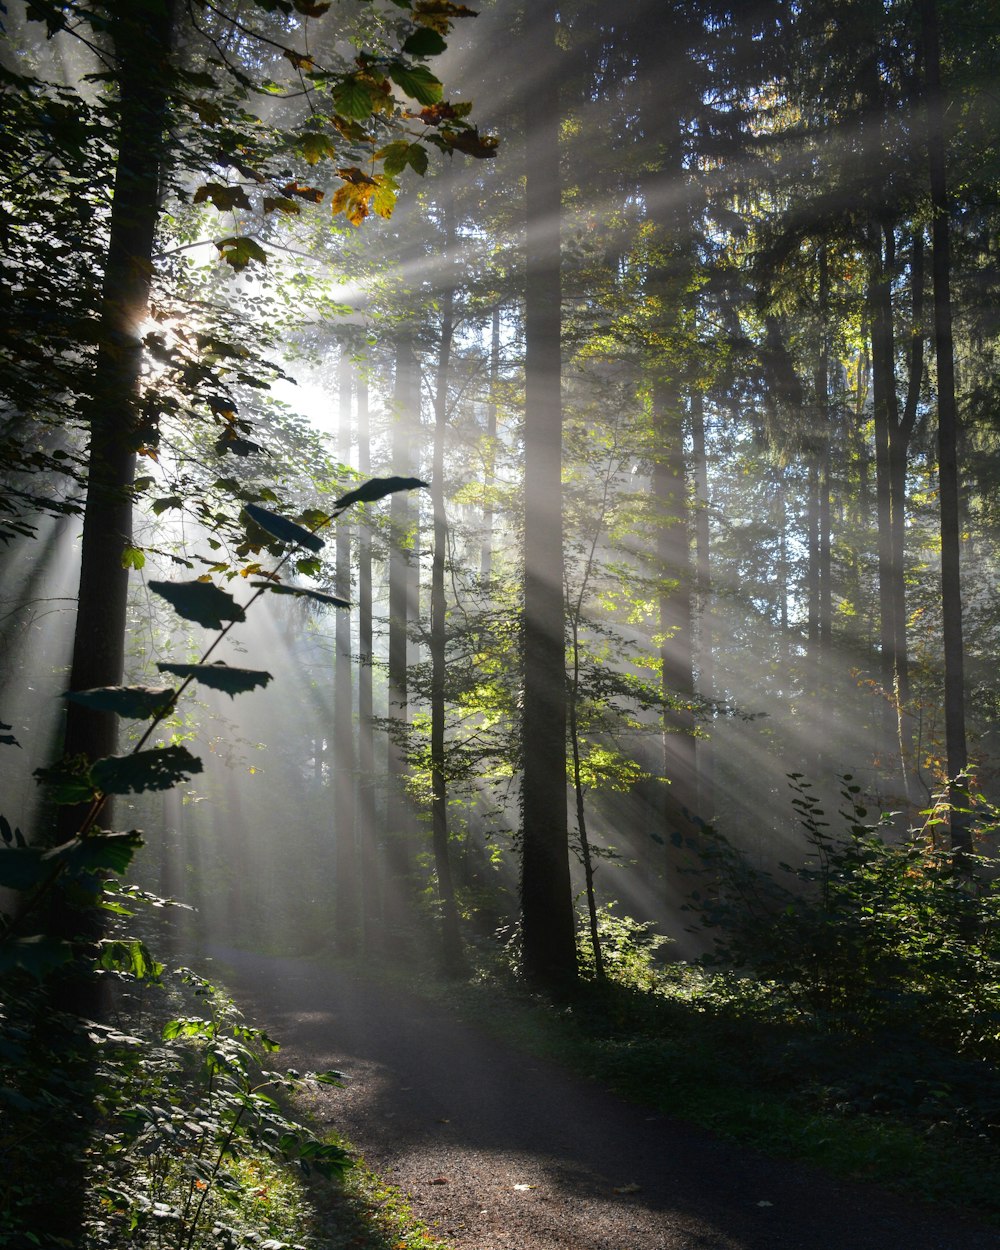 sunlight reflecting on trees in the forest